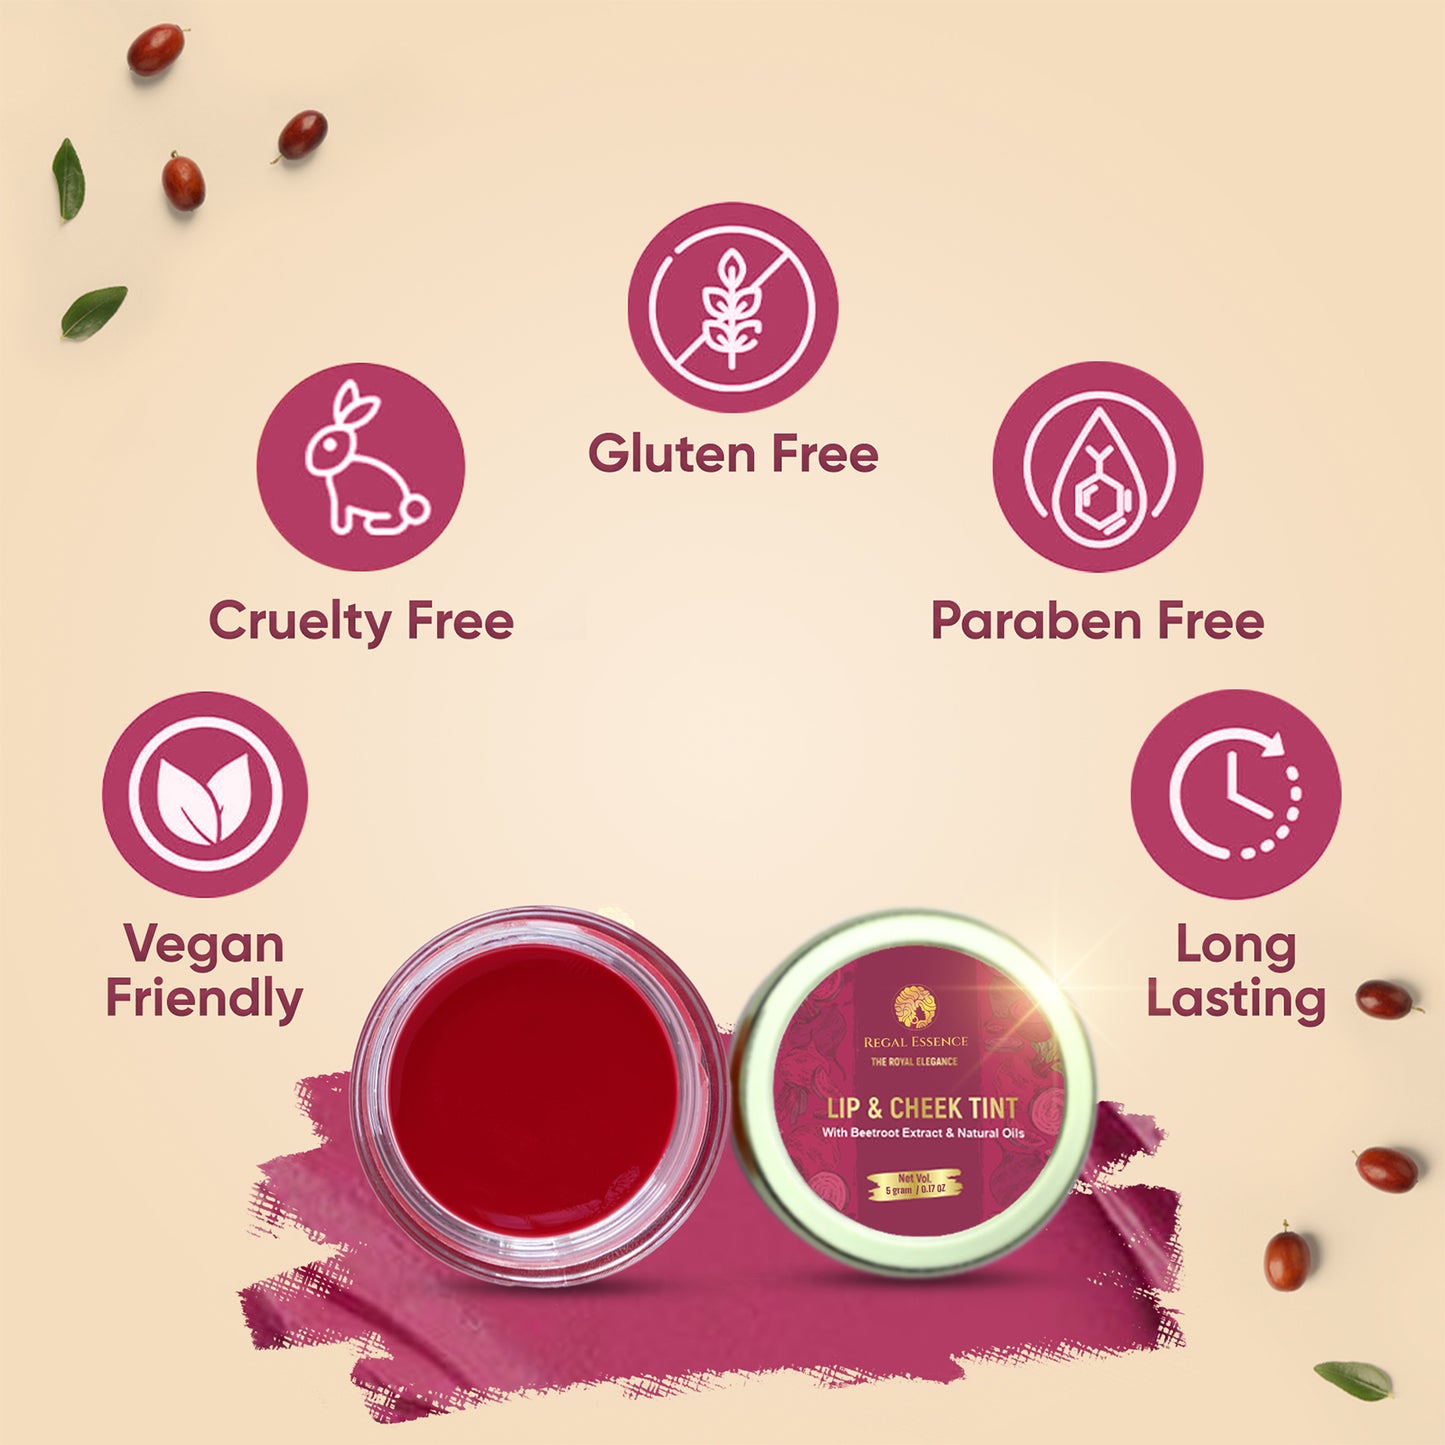 REGAL ESSENCE Lip, Eye & Cheek Tint, and blush, & peachy Pink, with beetroot Extract, Cocoa, Coconut & Olive Oil Organic Free Applicator for Deep Moisturizing and nourishing with Almond Oil and shea Butter, 5  Gm ( COMBO PACK ) VedapureNaturals